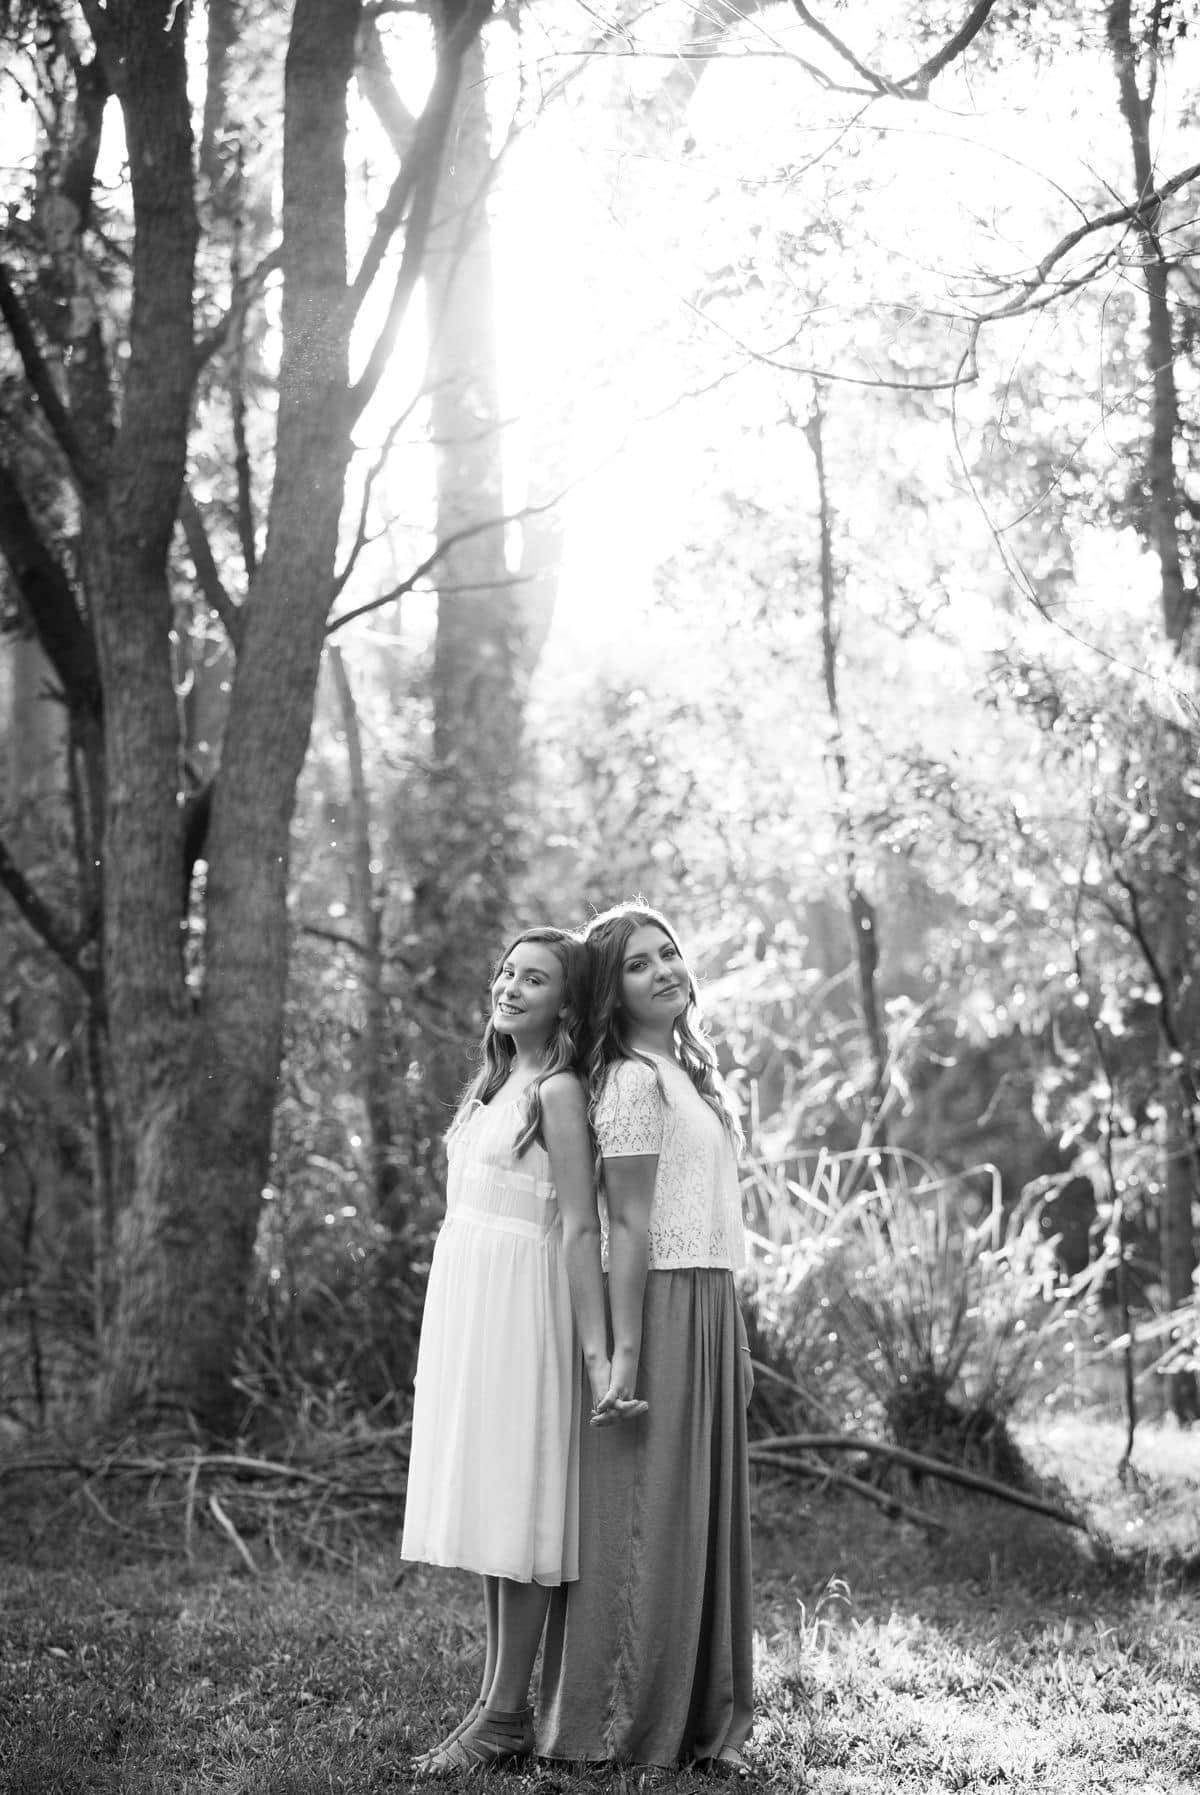 Sisters Photoshoot Field + Forst Photography www.fiendnandforest.com.au